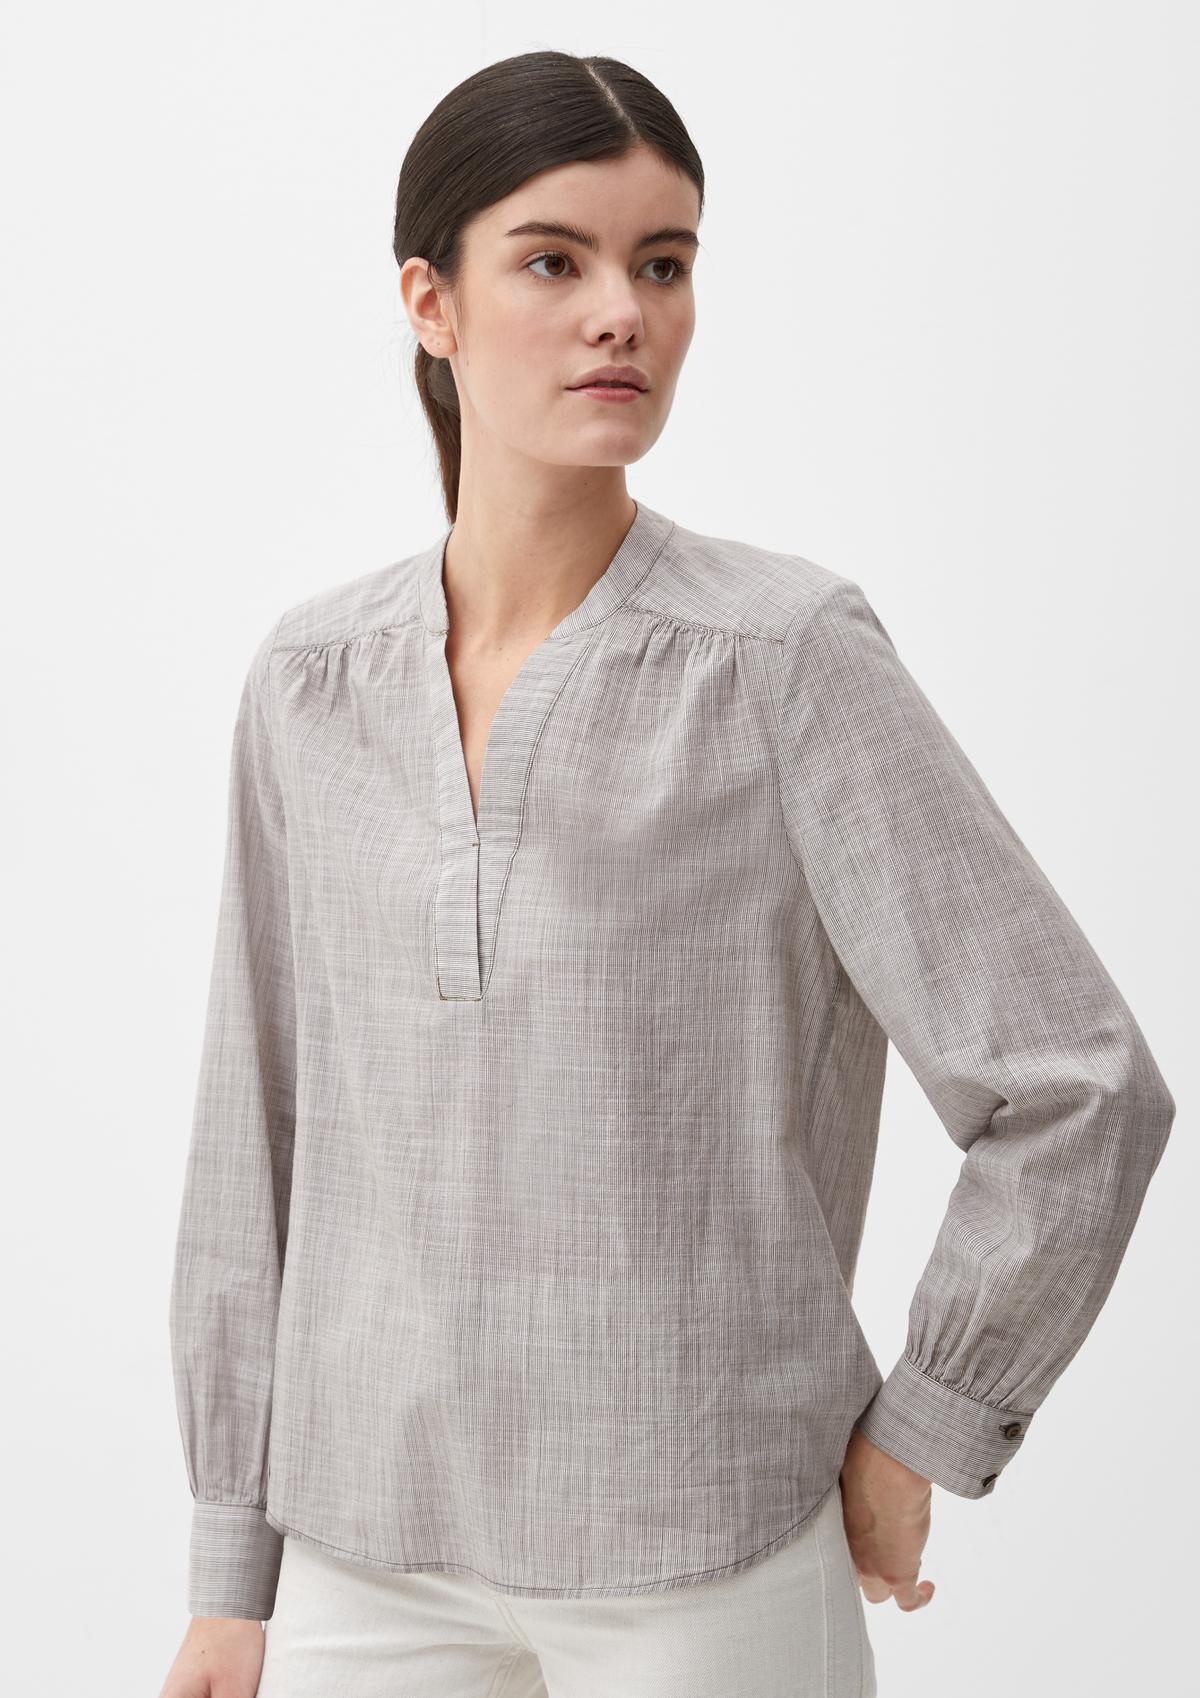 Tunic blouse with a striped pattern